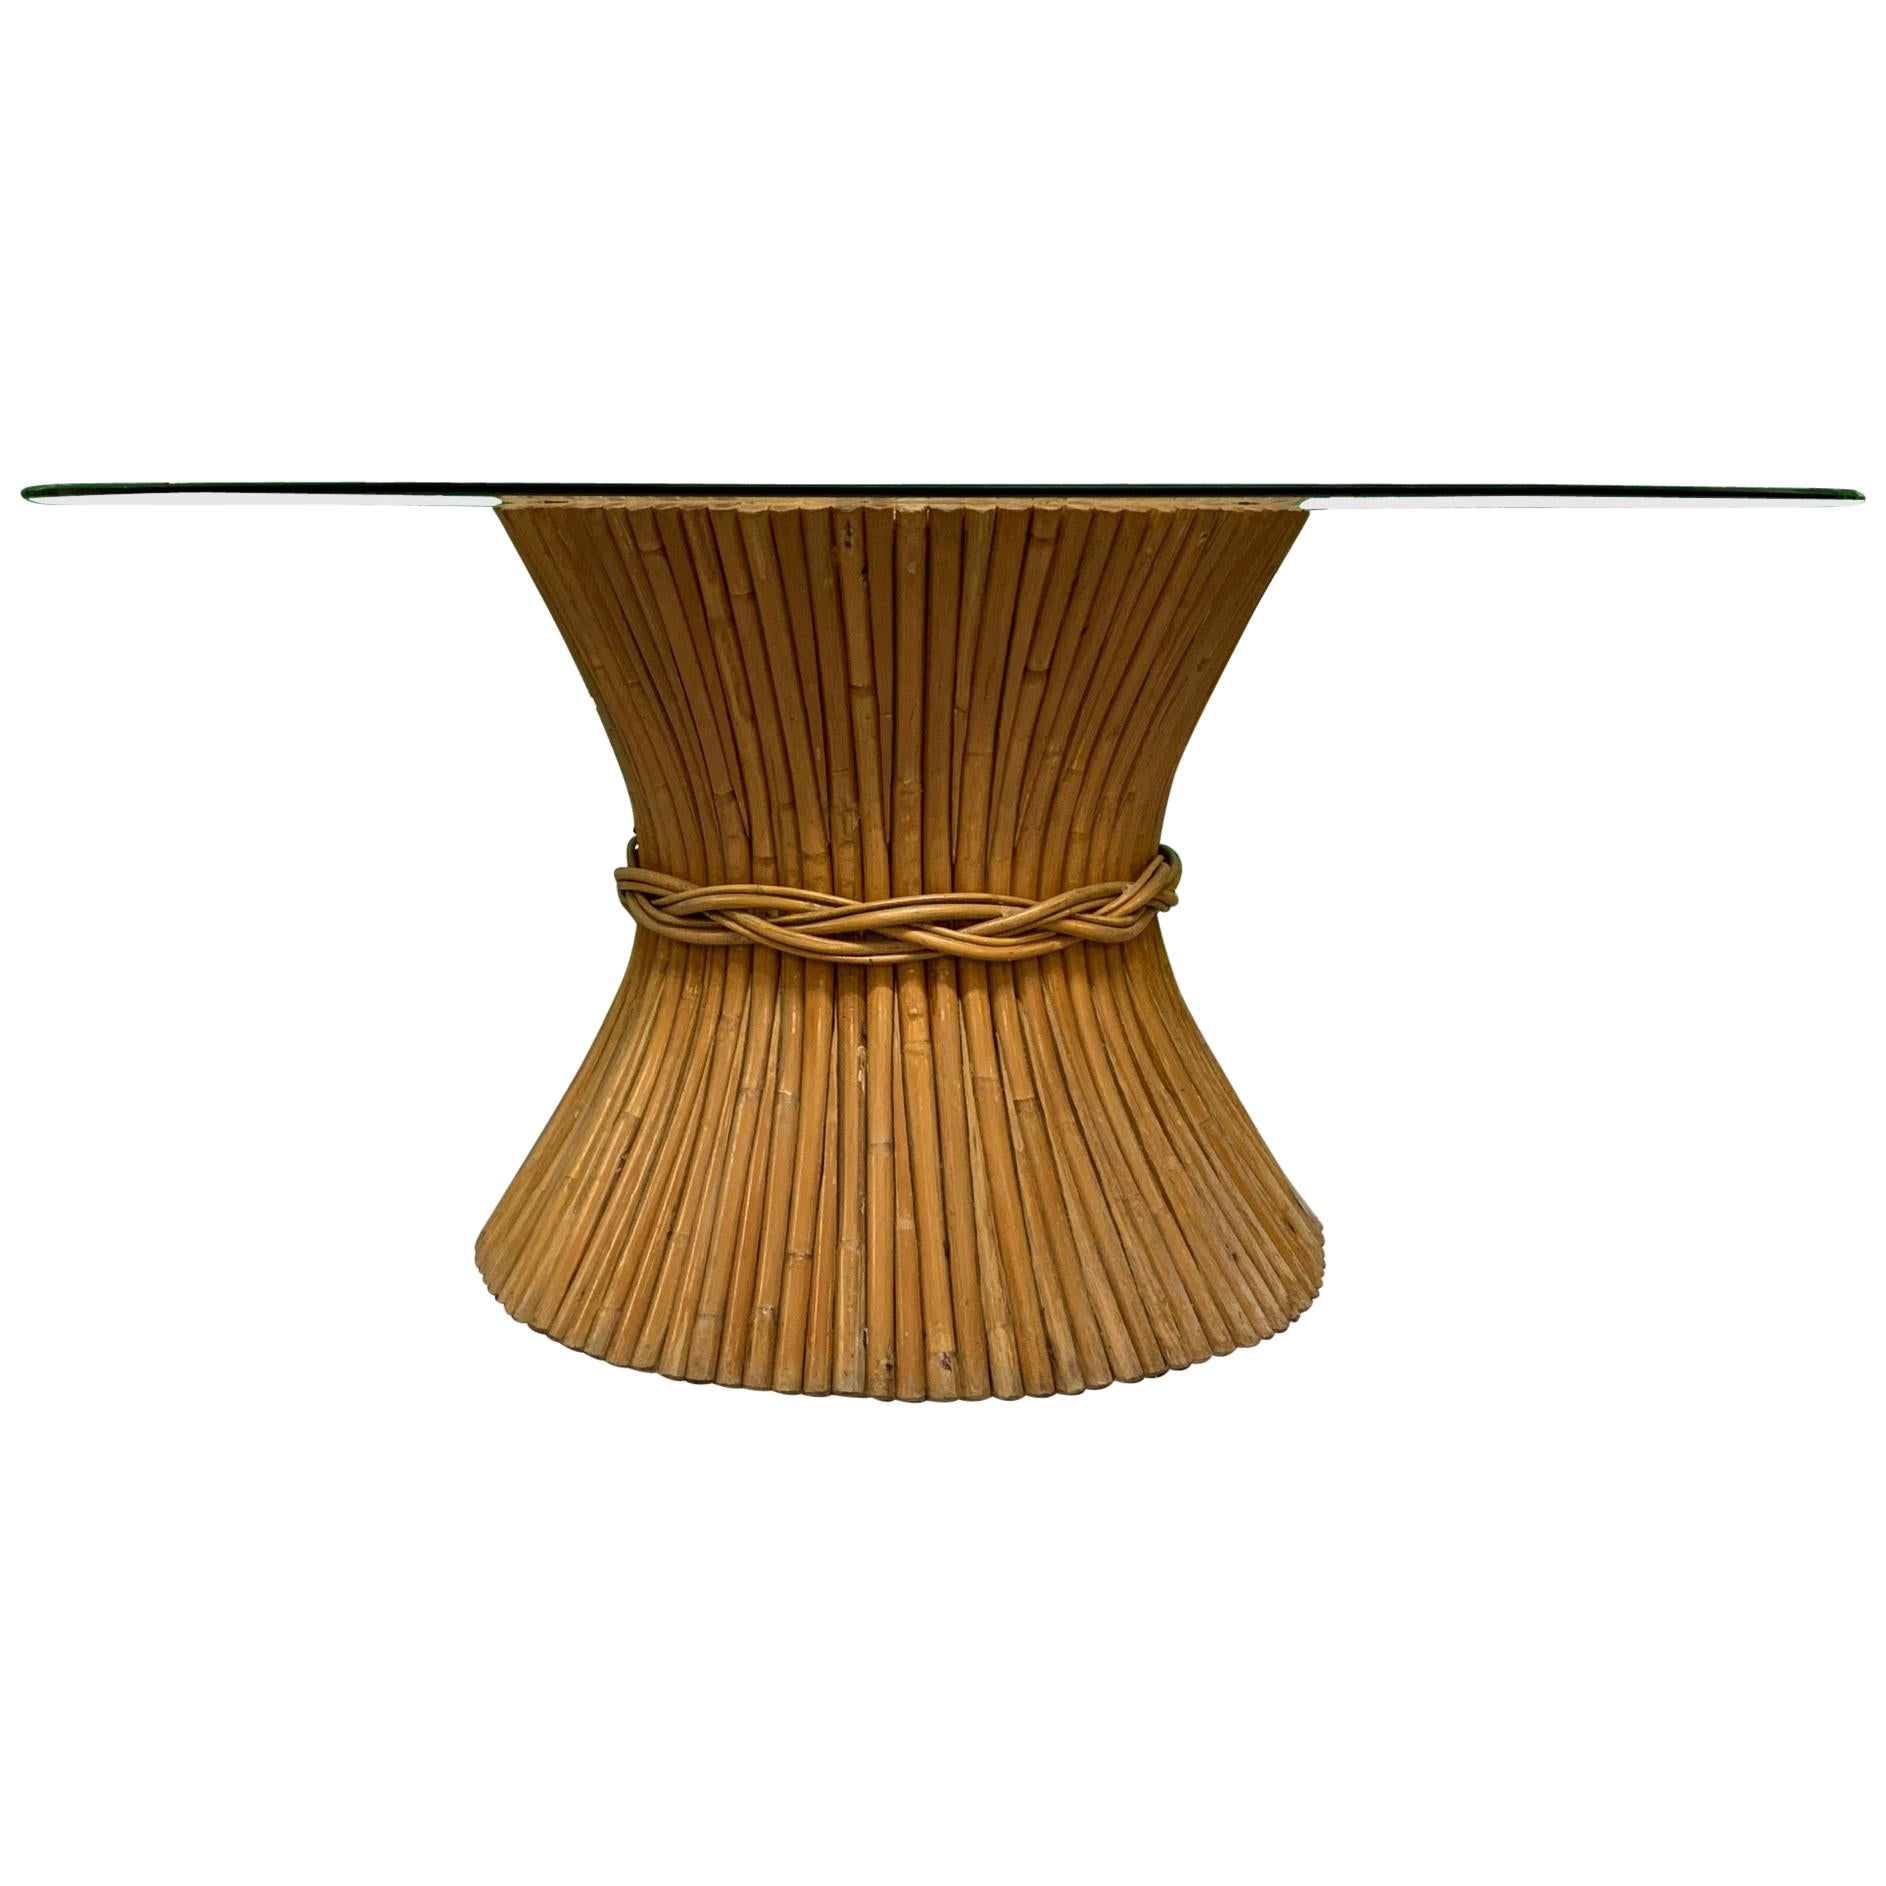 McGuire Rattan Sheaf of Wheat Dining Table